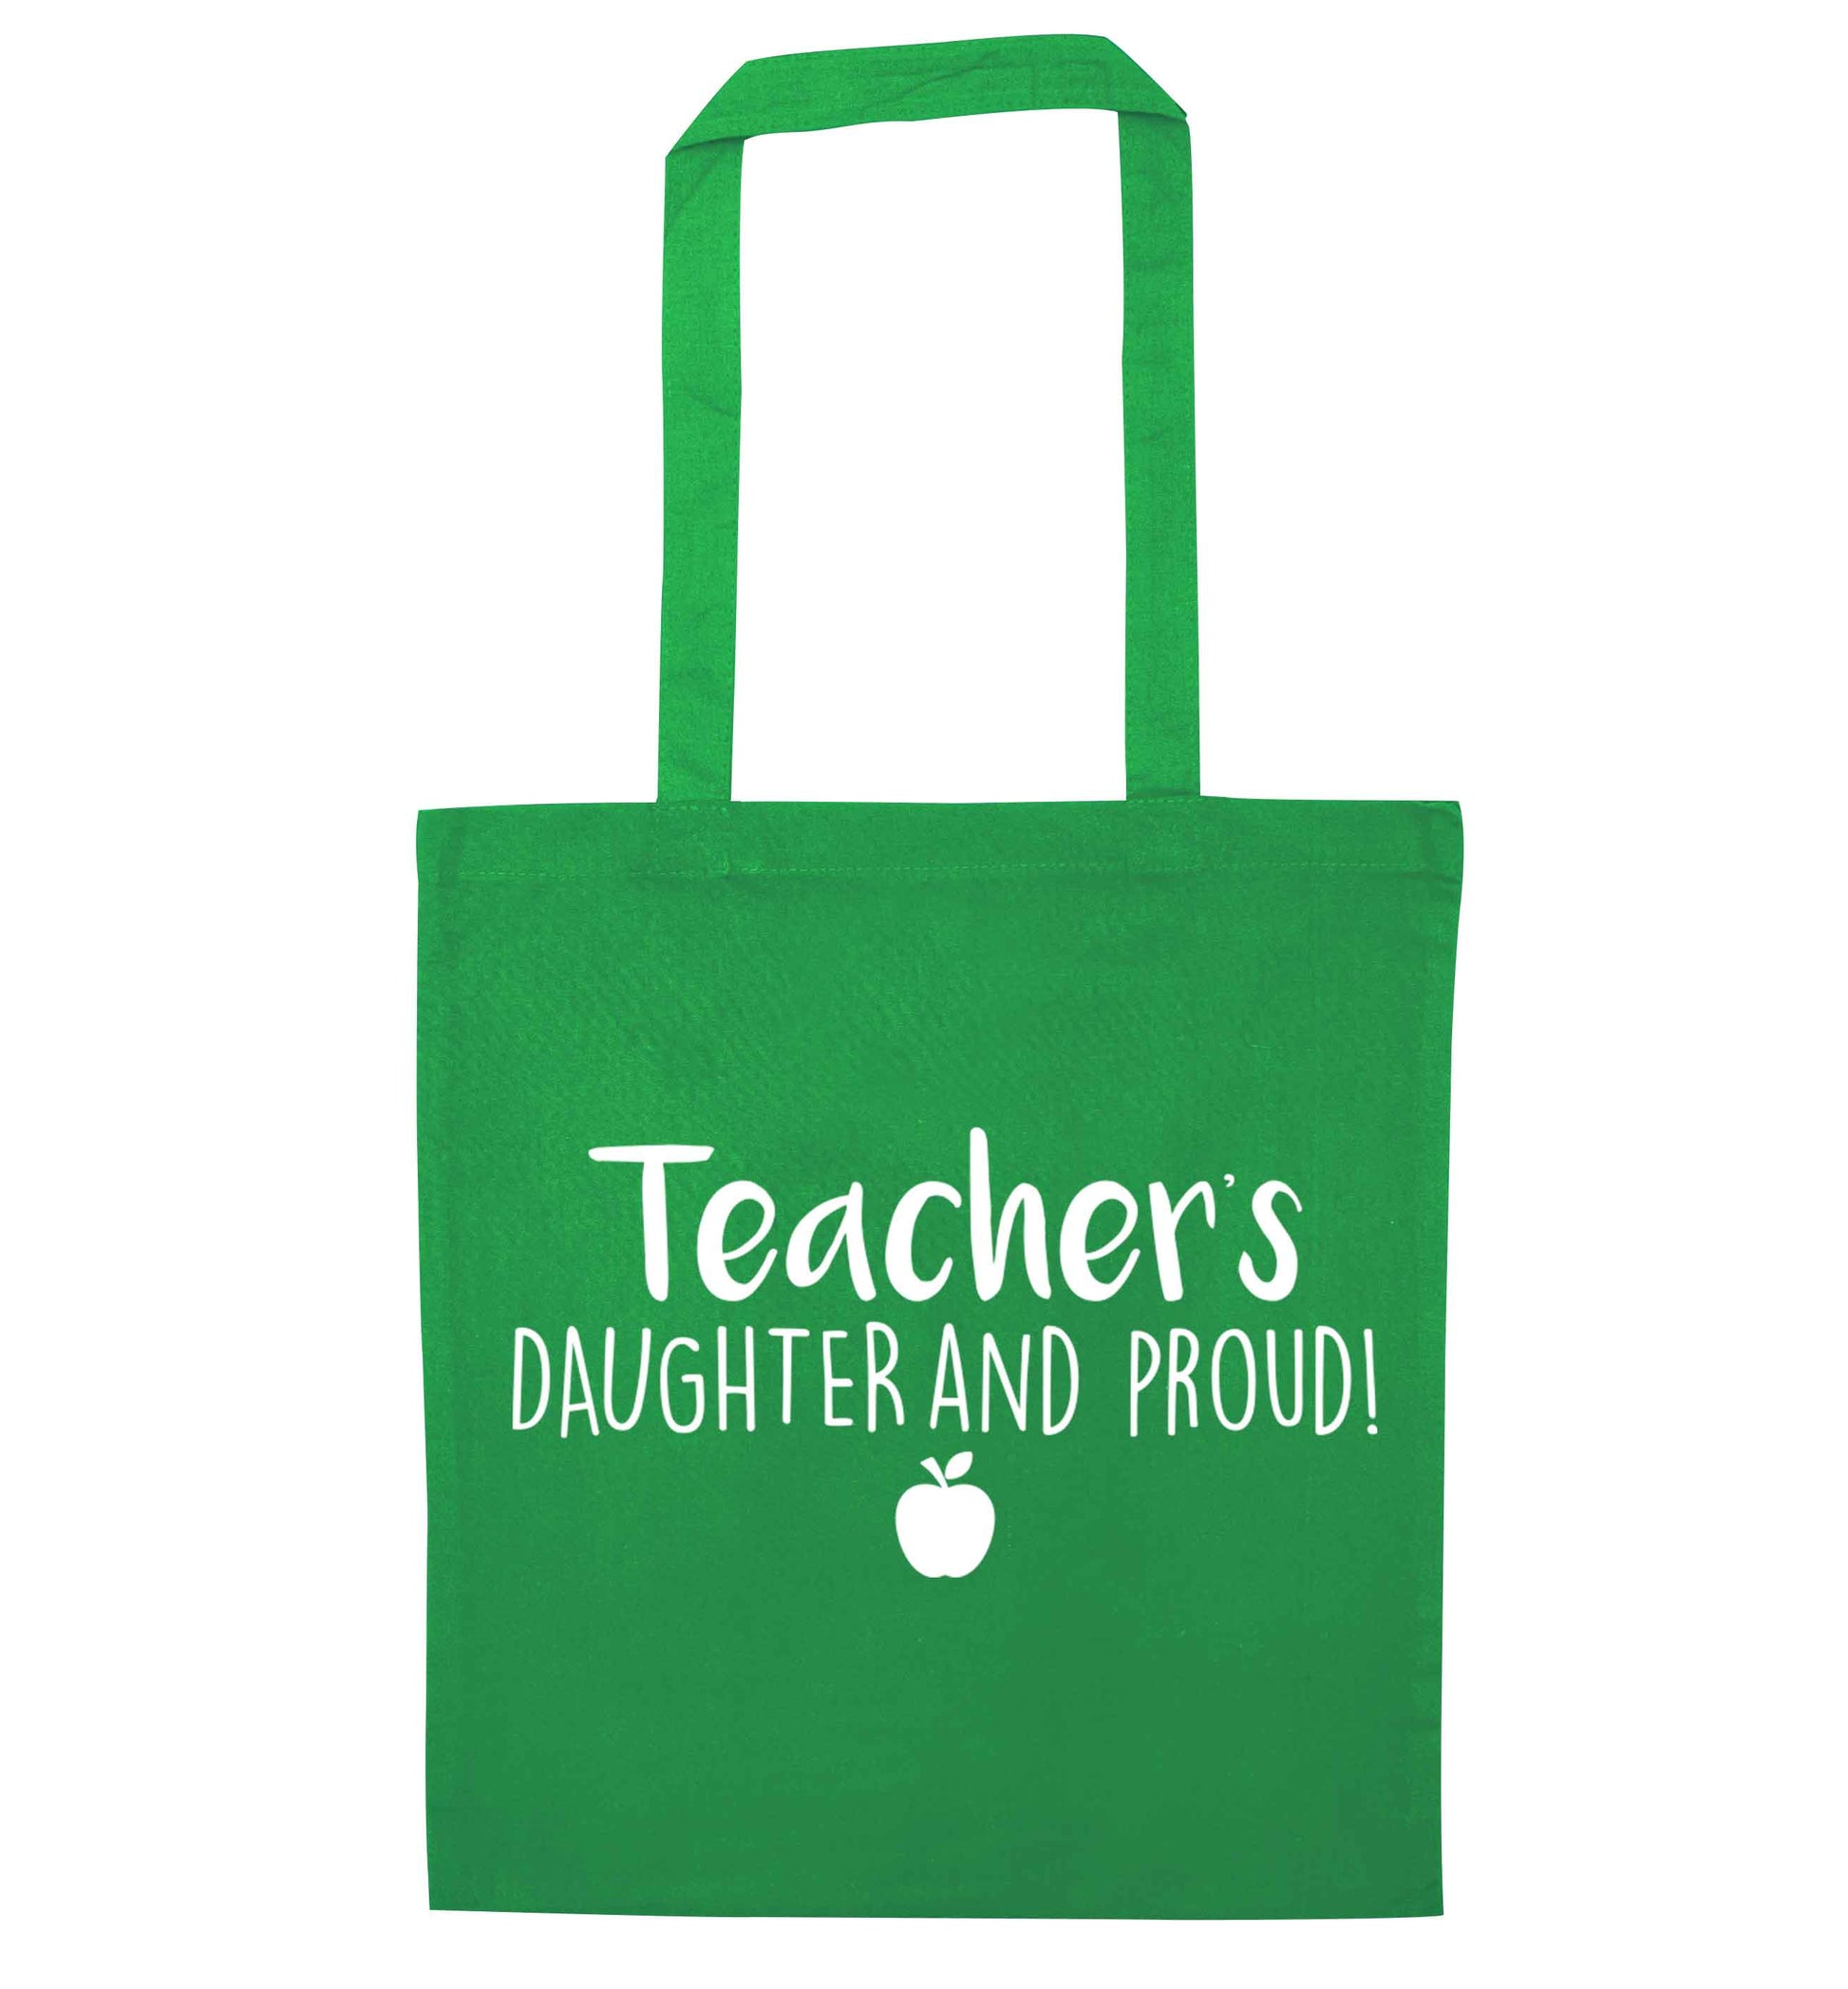 Teachers daughter and proud green tote bag